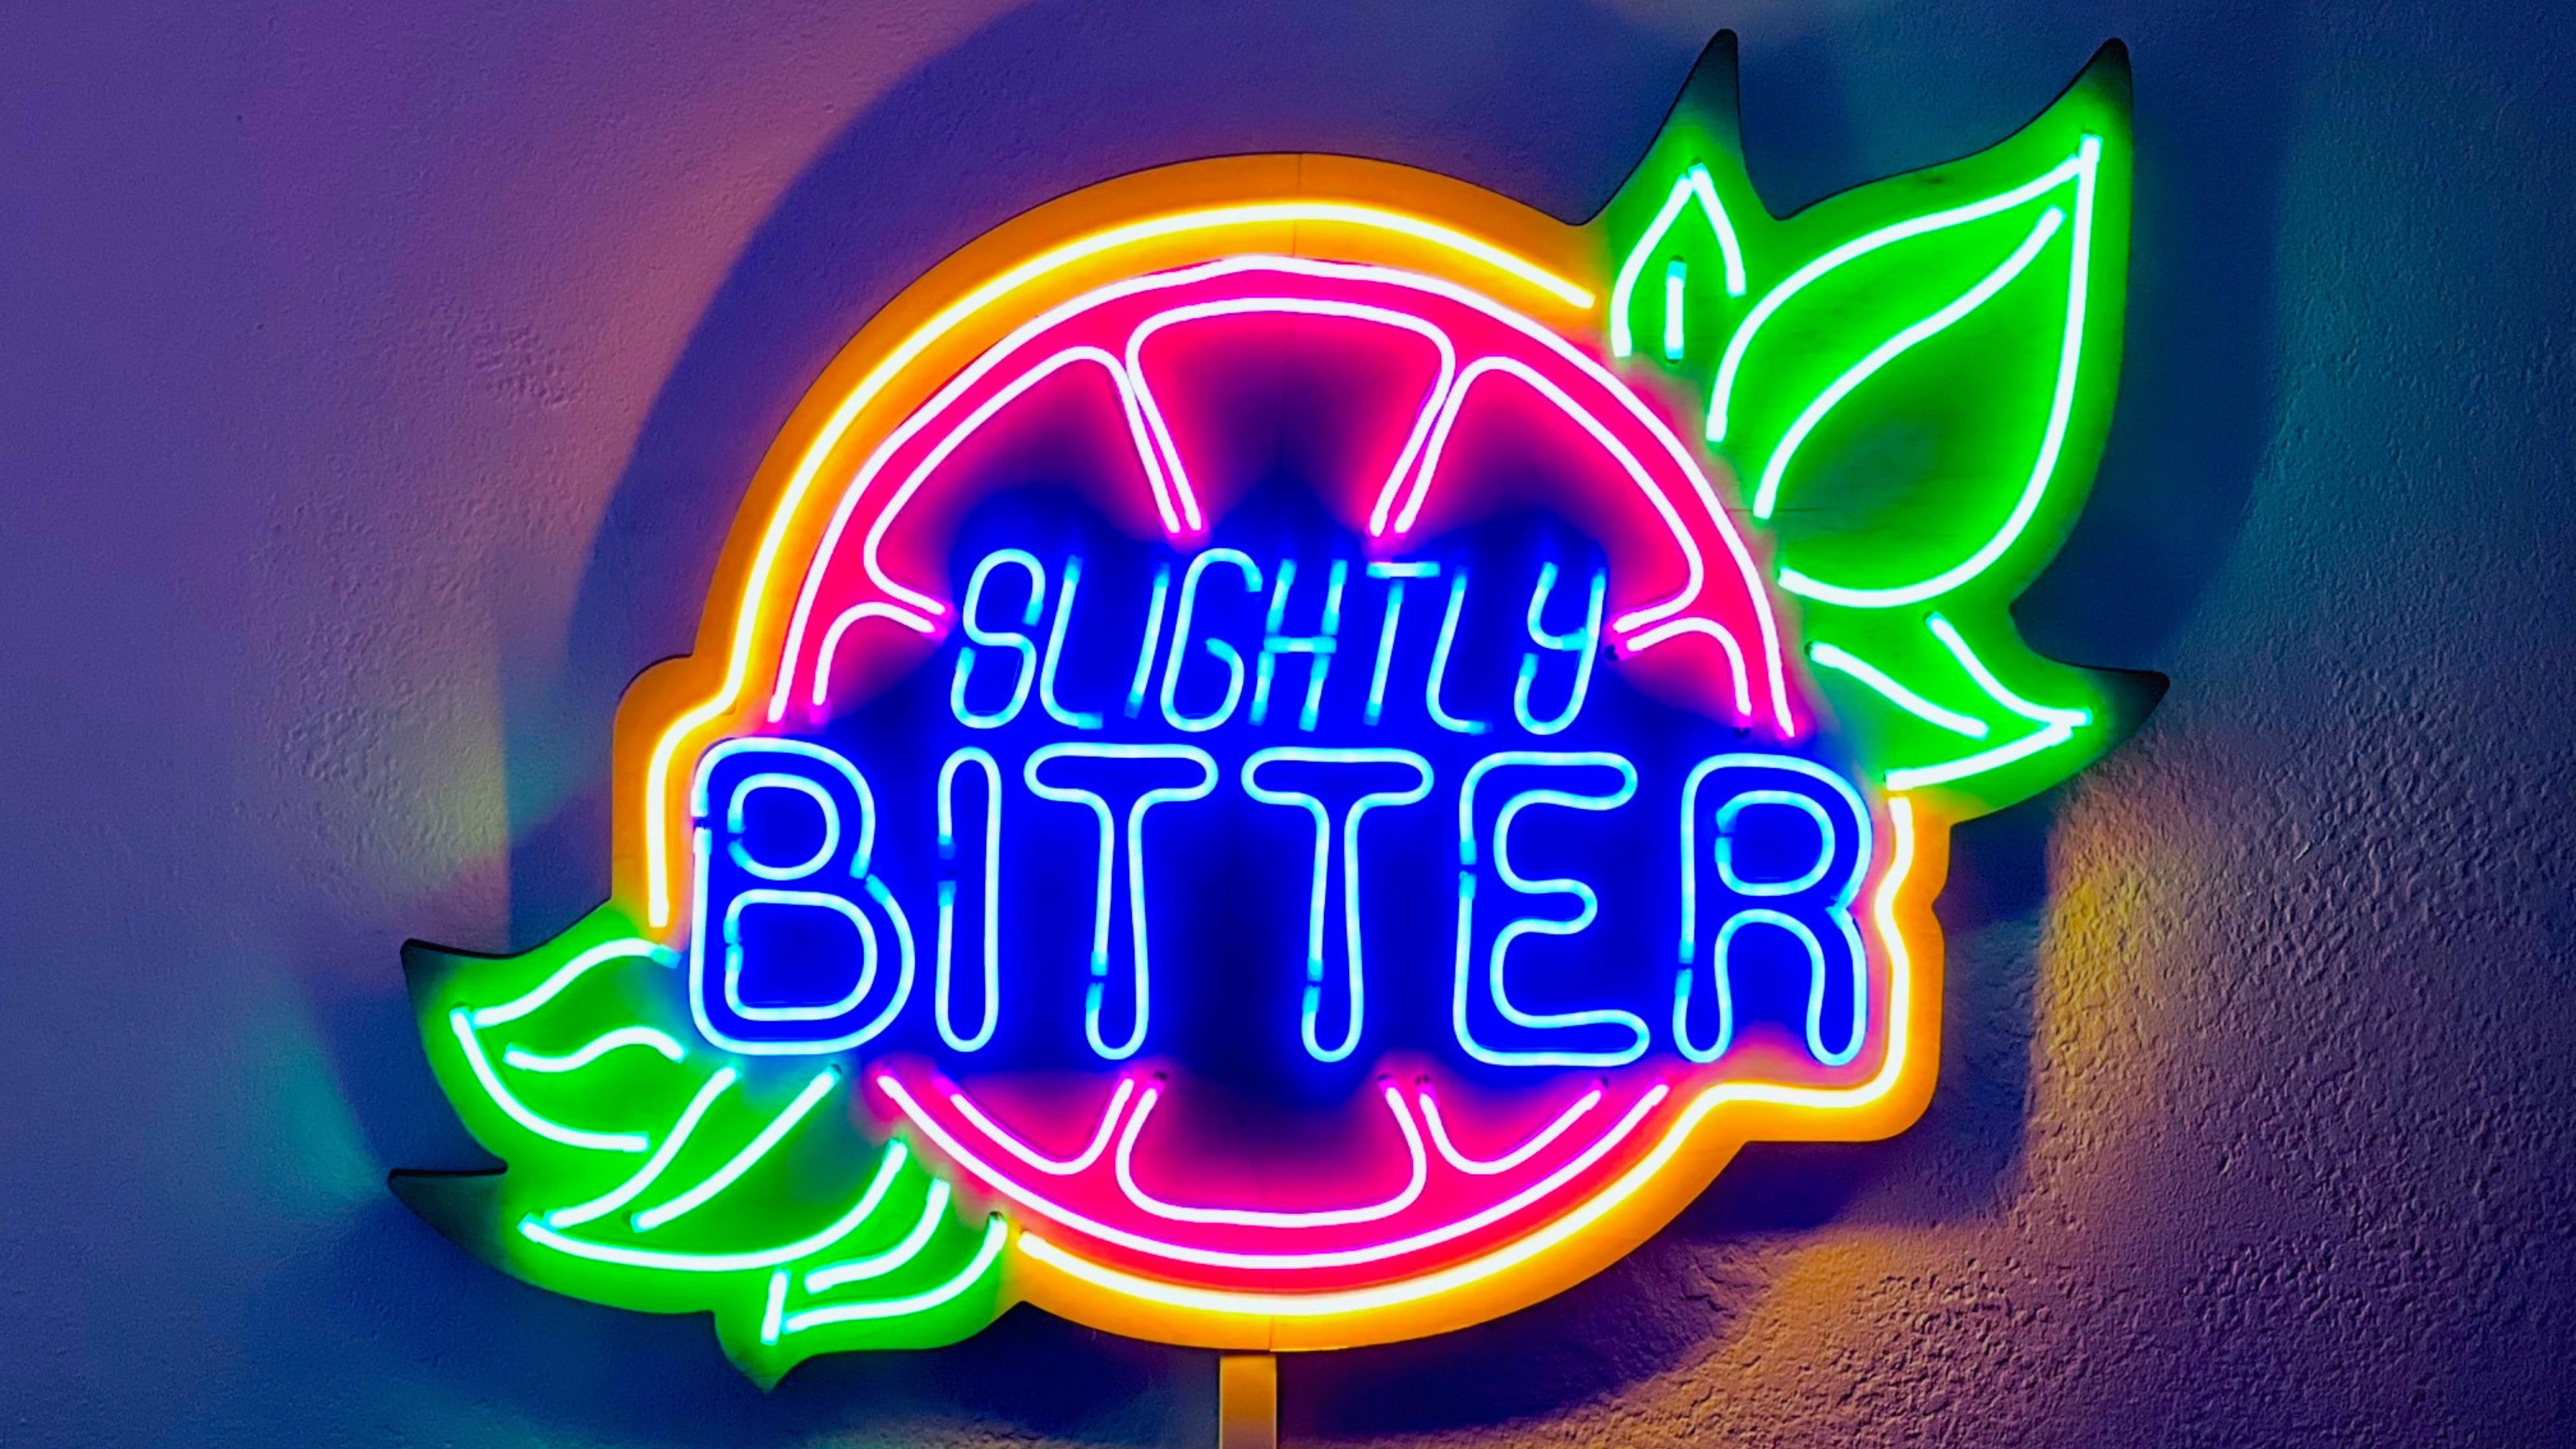 A neon sign in the shape of a grapefruit that says 'Slightly Bitter'.